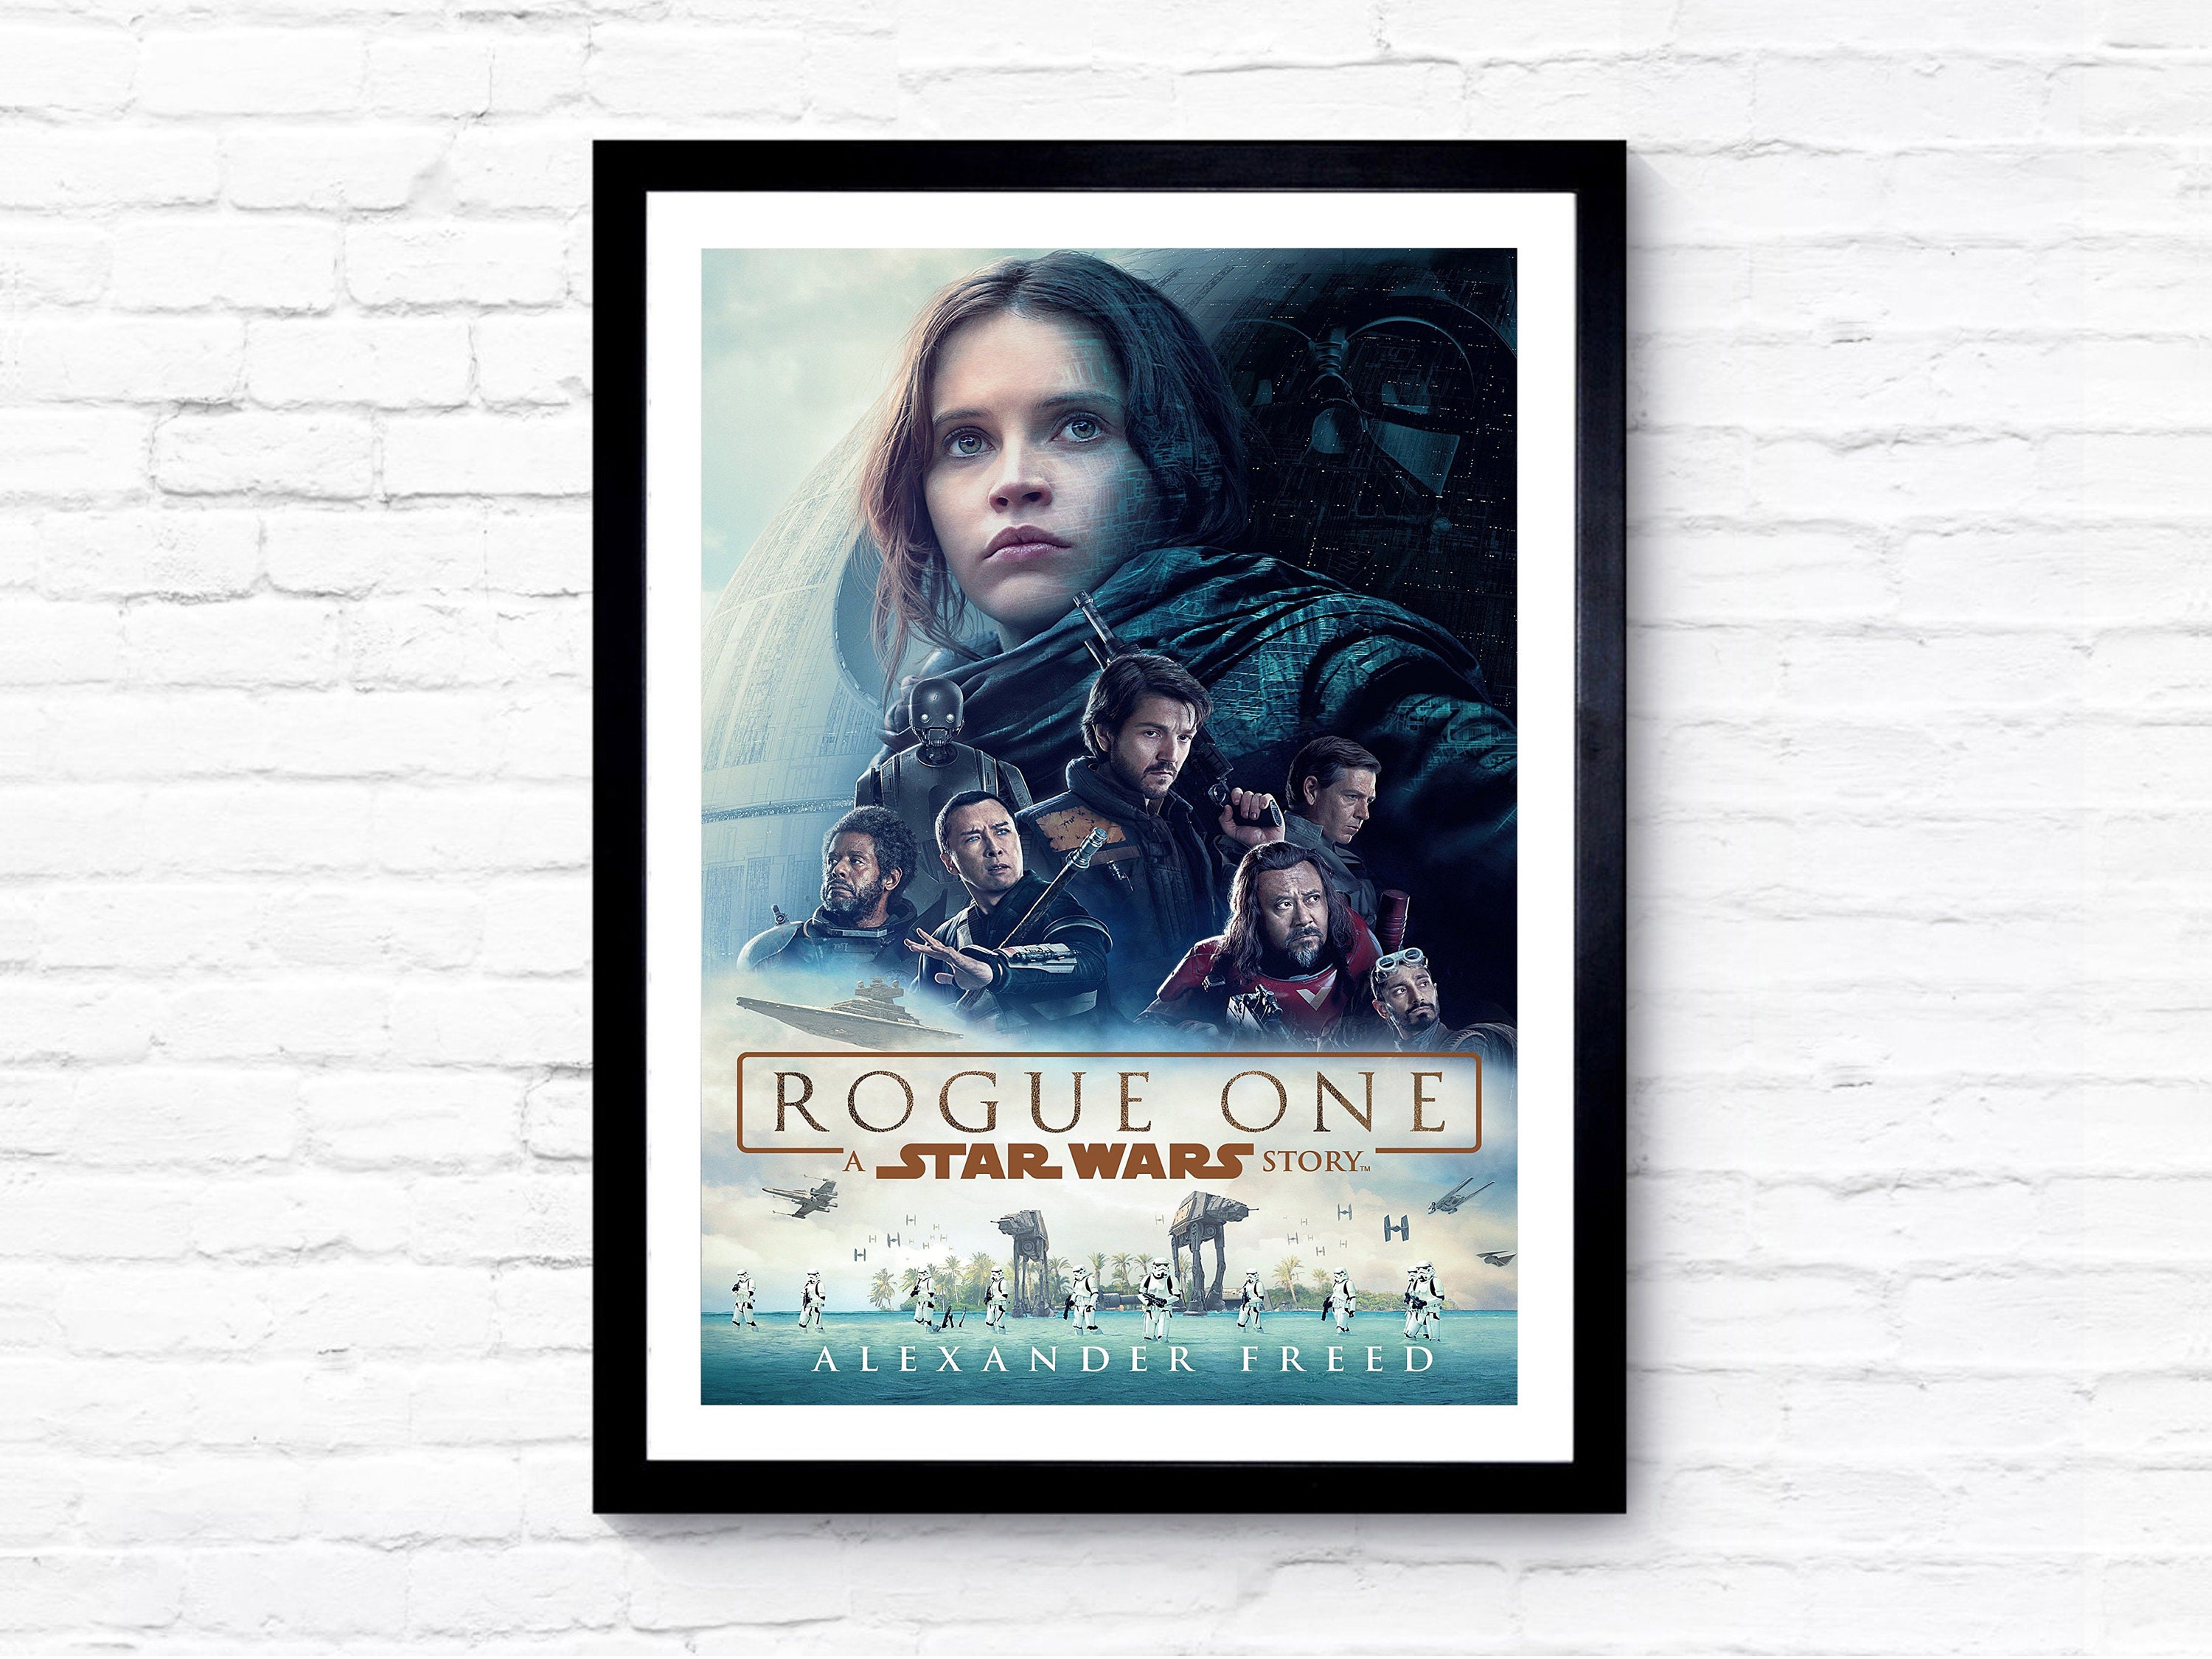 Gunst referentie feit Rogue One A Star Wars Story - 2016 - Movie Poster Film Poster Movie Poster  Art - A1 A2